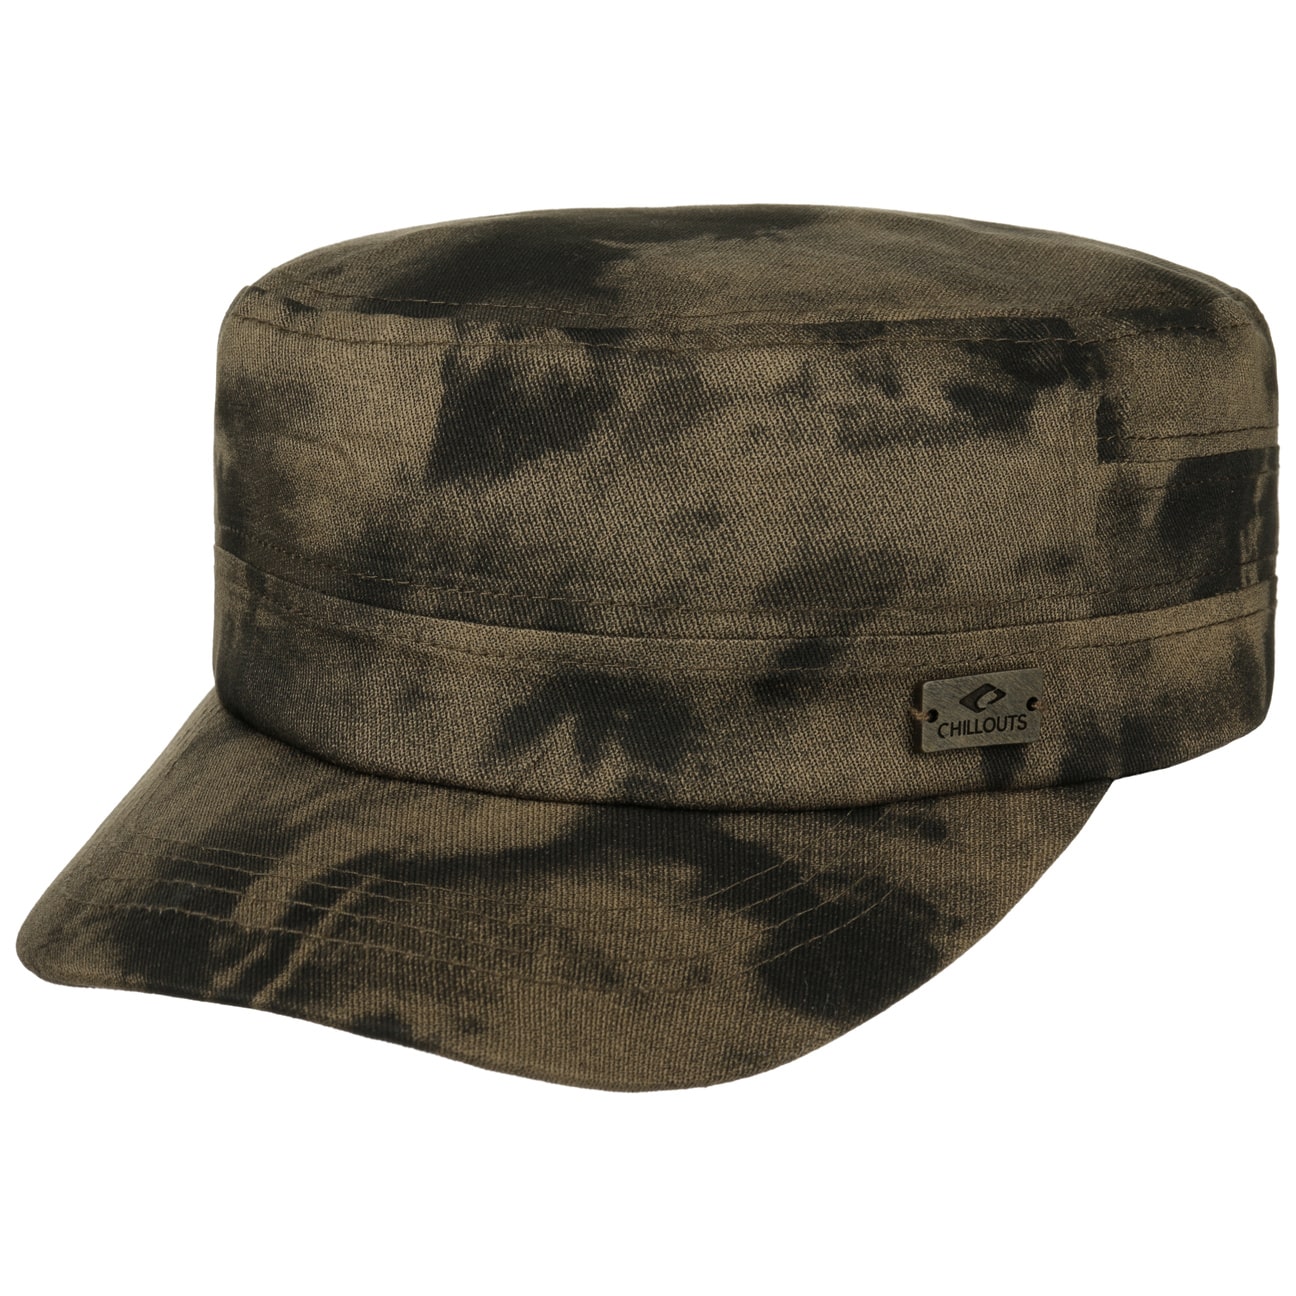 Corrientes Armycap by Chillouts von Chillouts